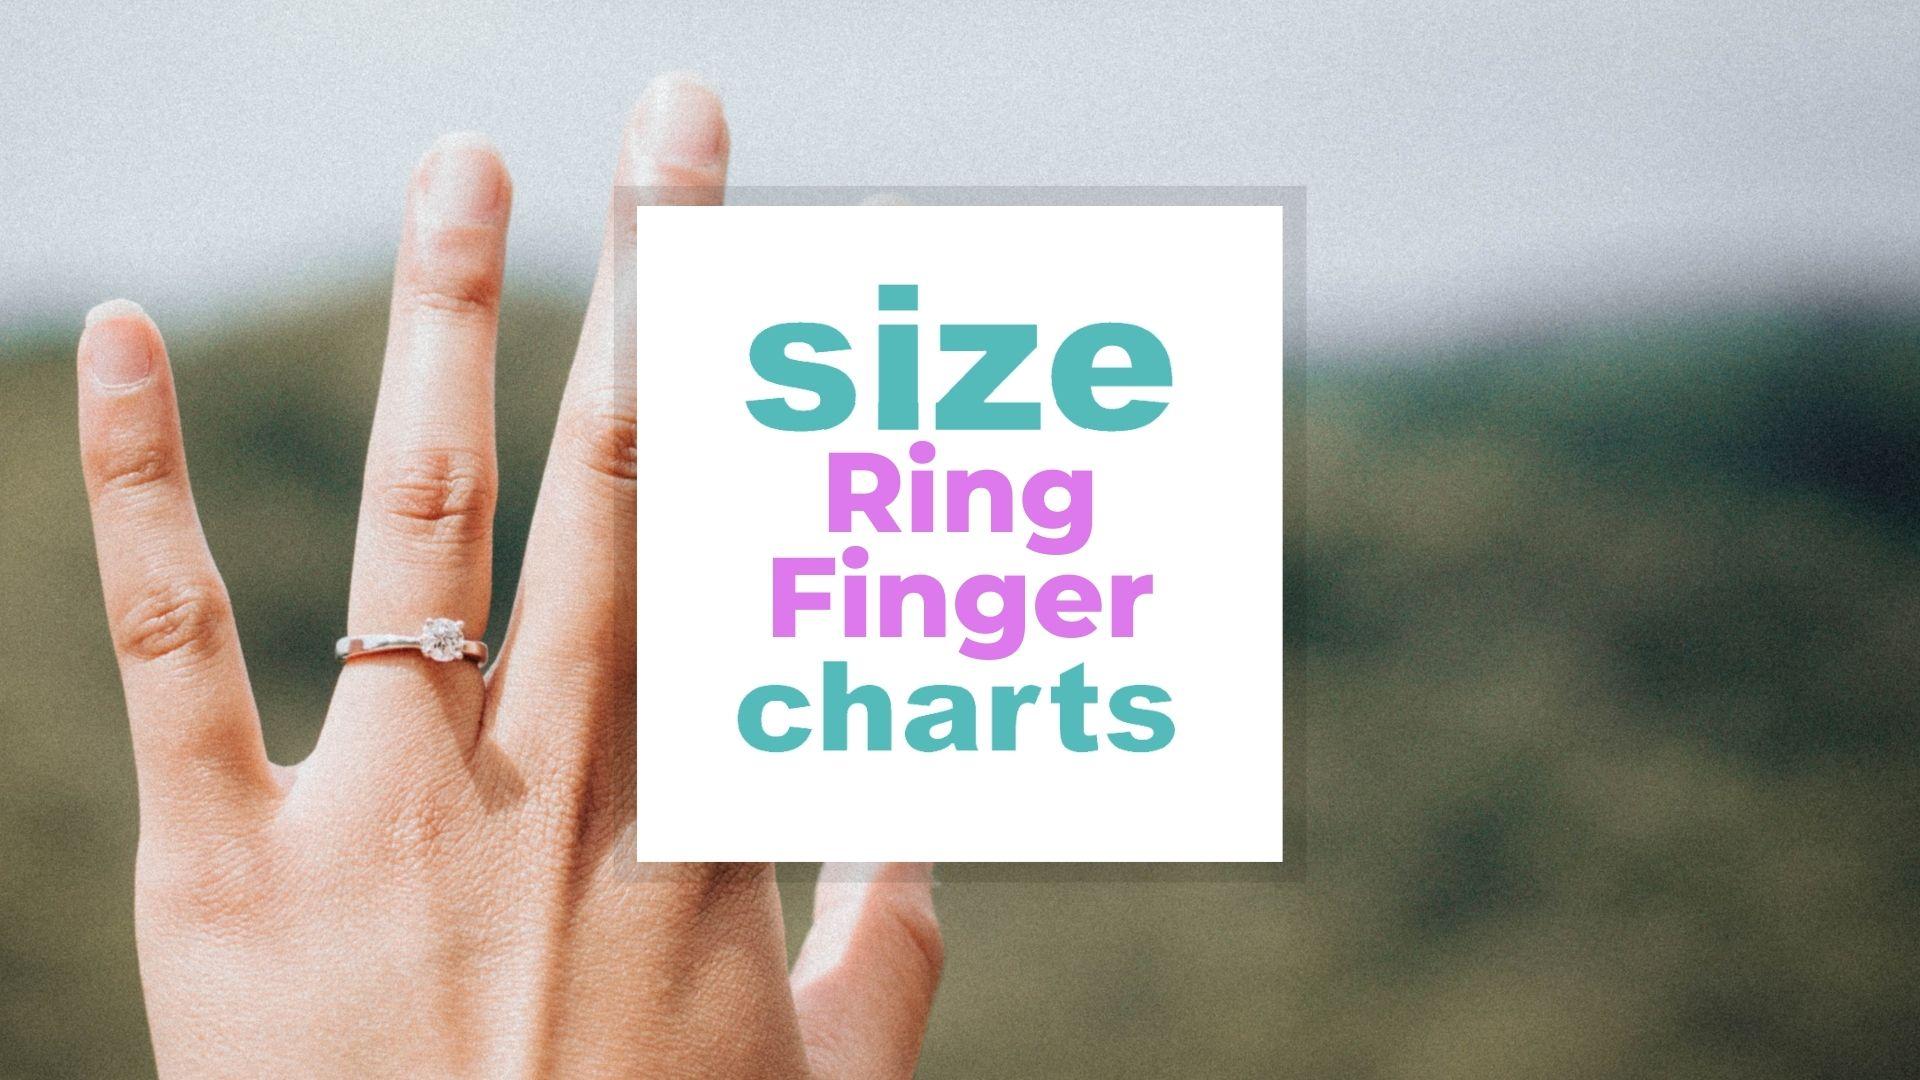 Ring Finger Size Chart: How to Find Your Ring Finger Size?